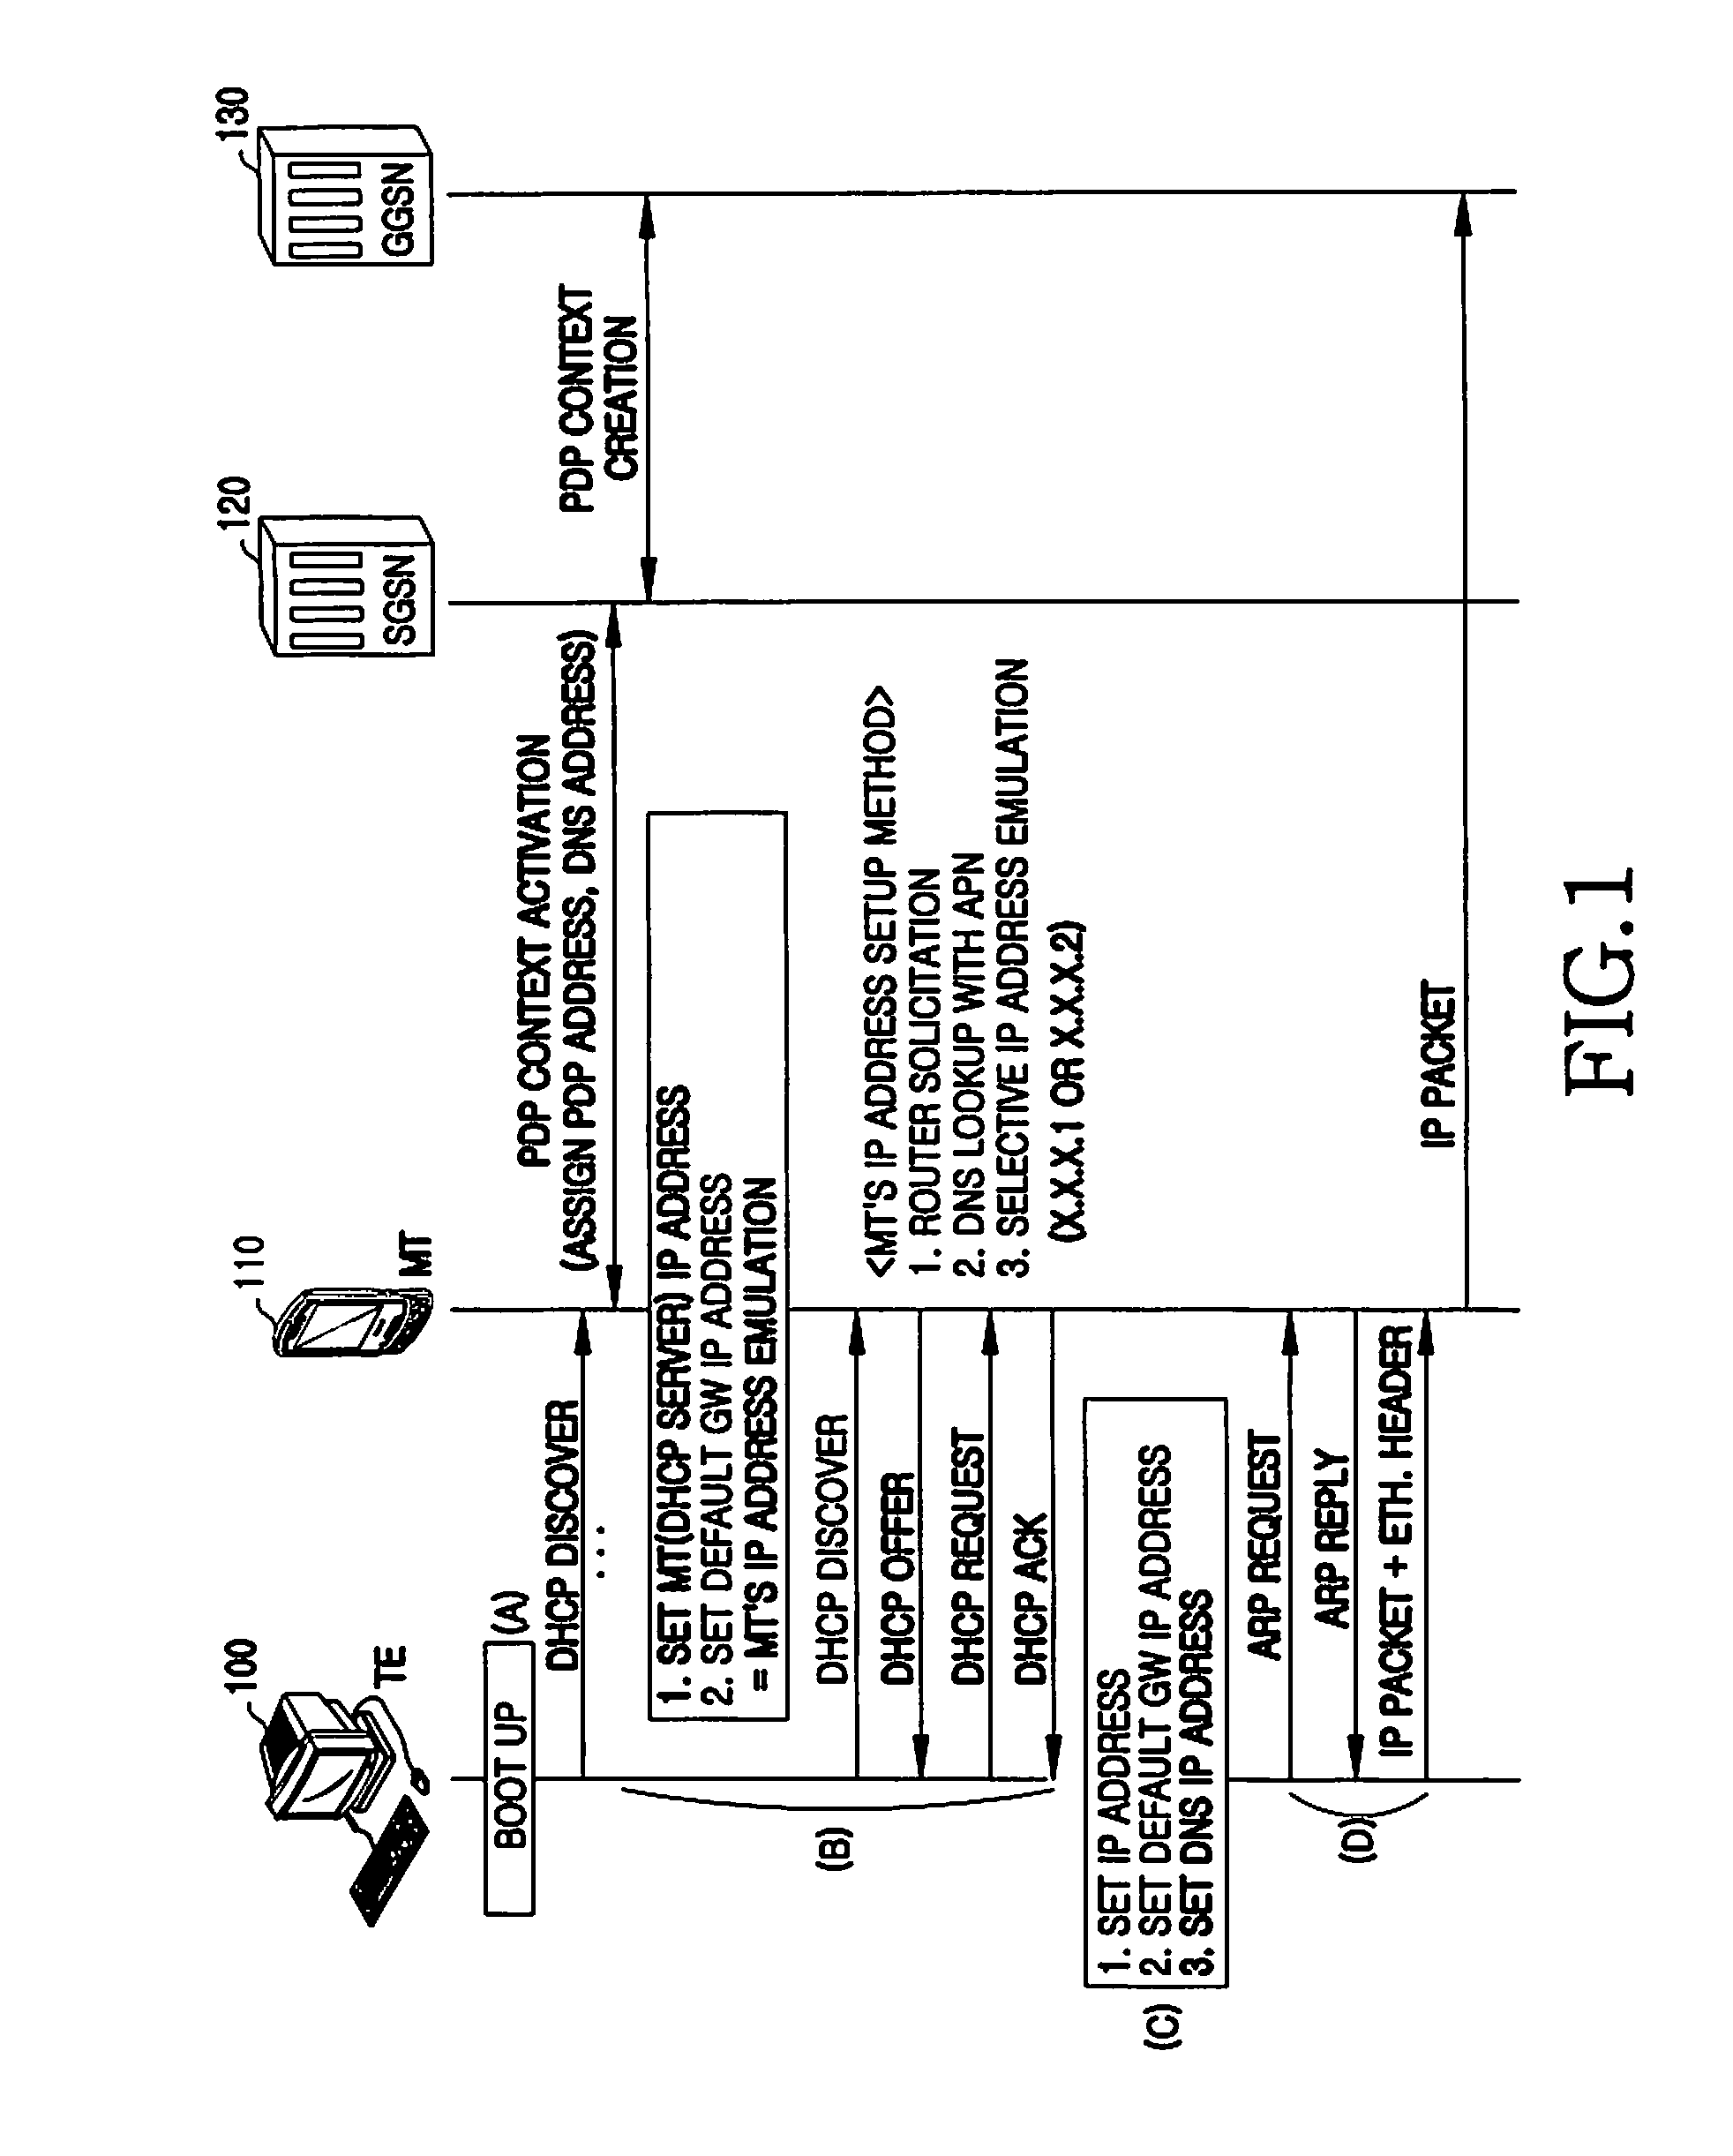 Apparatus and method for setting a default gateway address in a mobile communication system